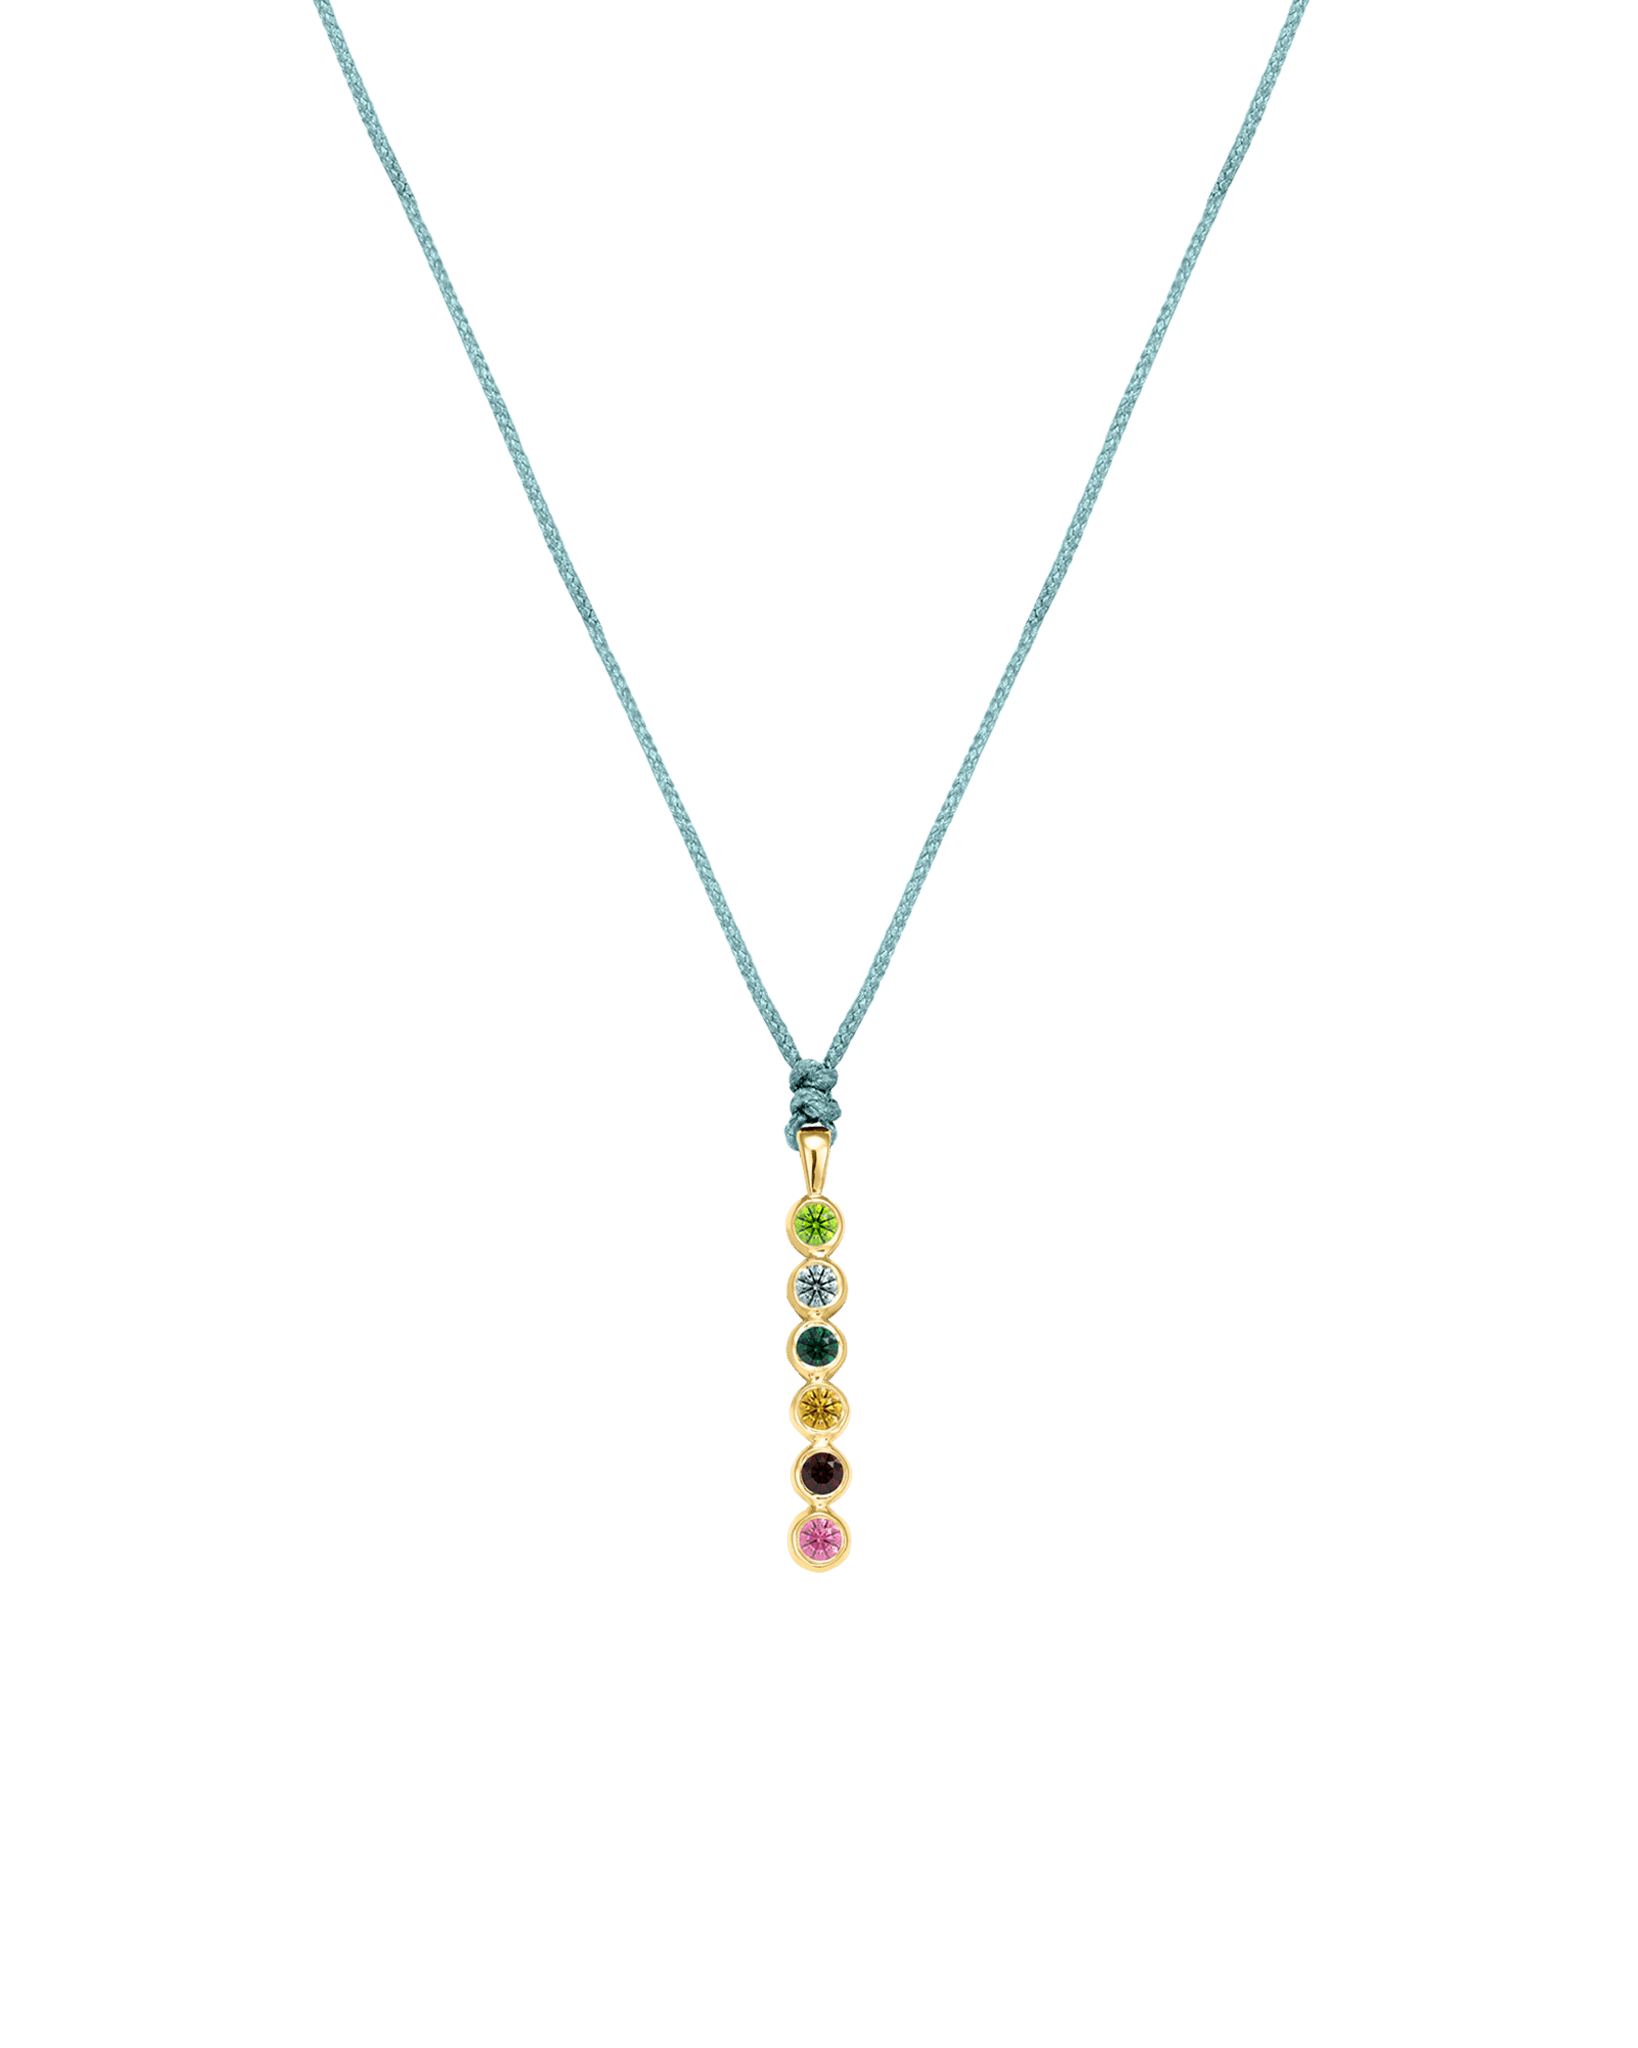 The Birthstones Bar Necklace - 14K Yellow Gold Necklaces 14K Solid Gold Turquoise 2 